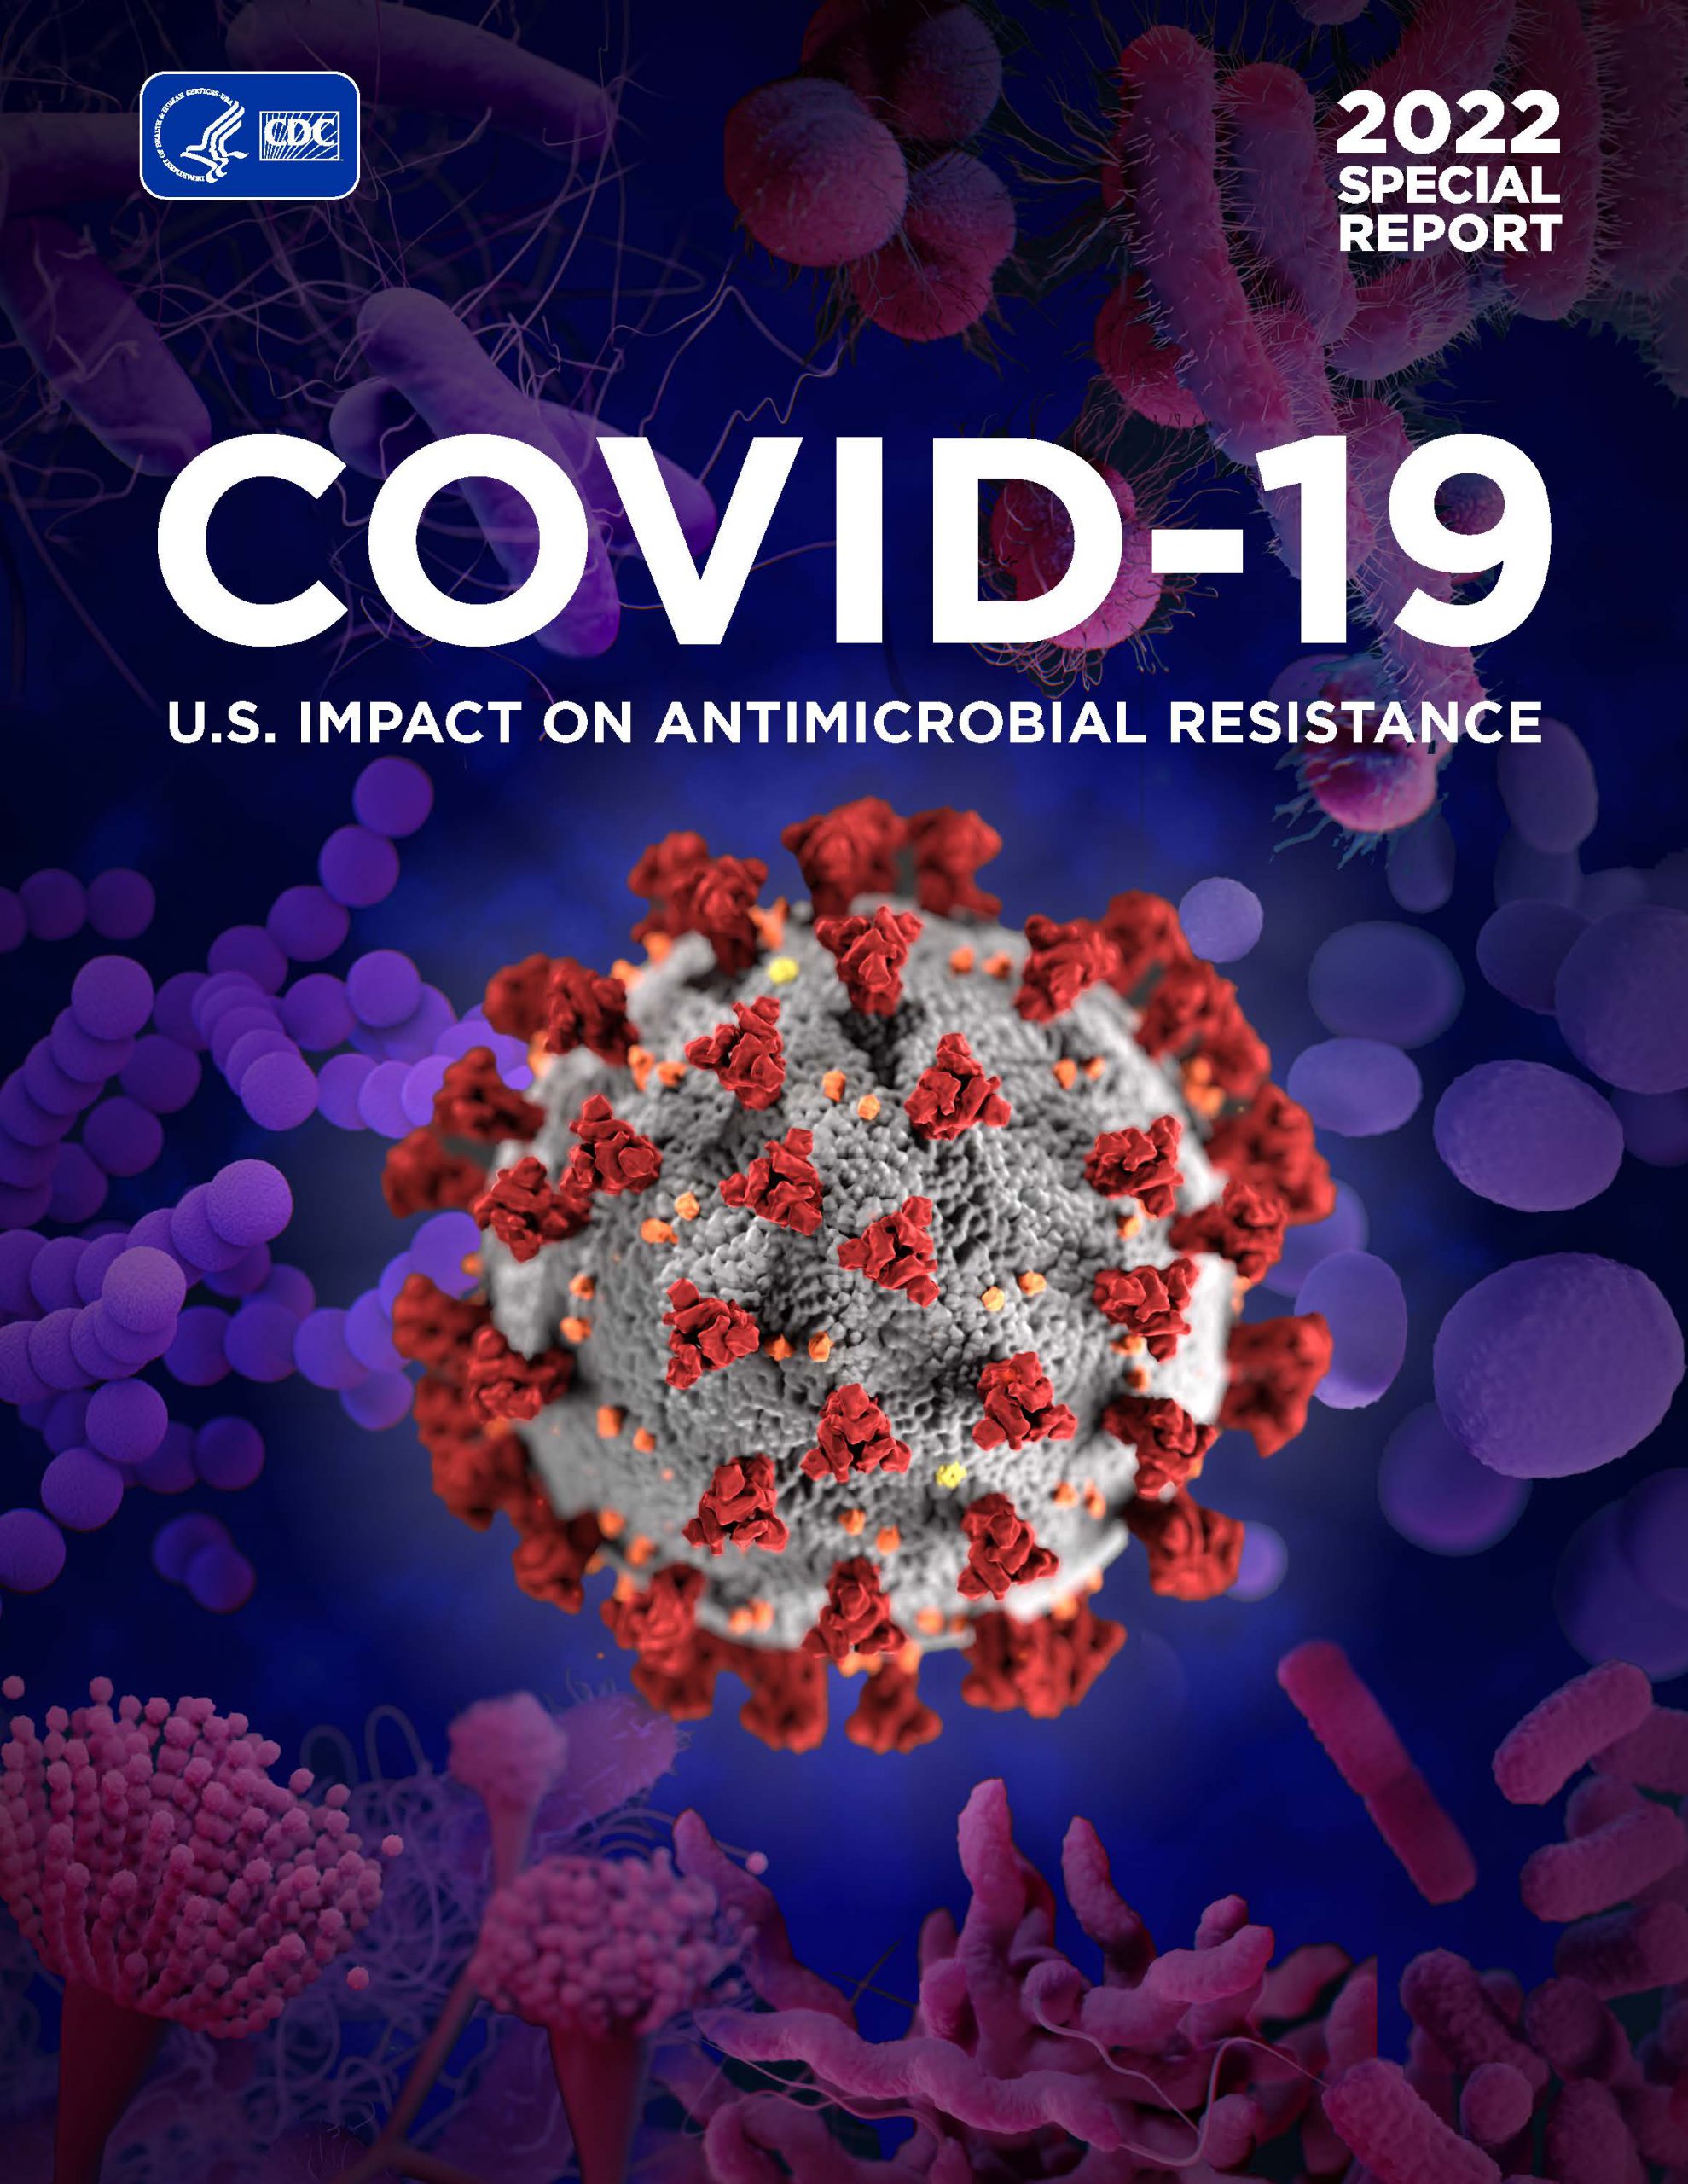 COVID-19 Impacts on Antimicrobial Resistance